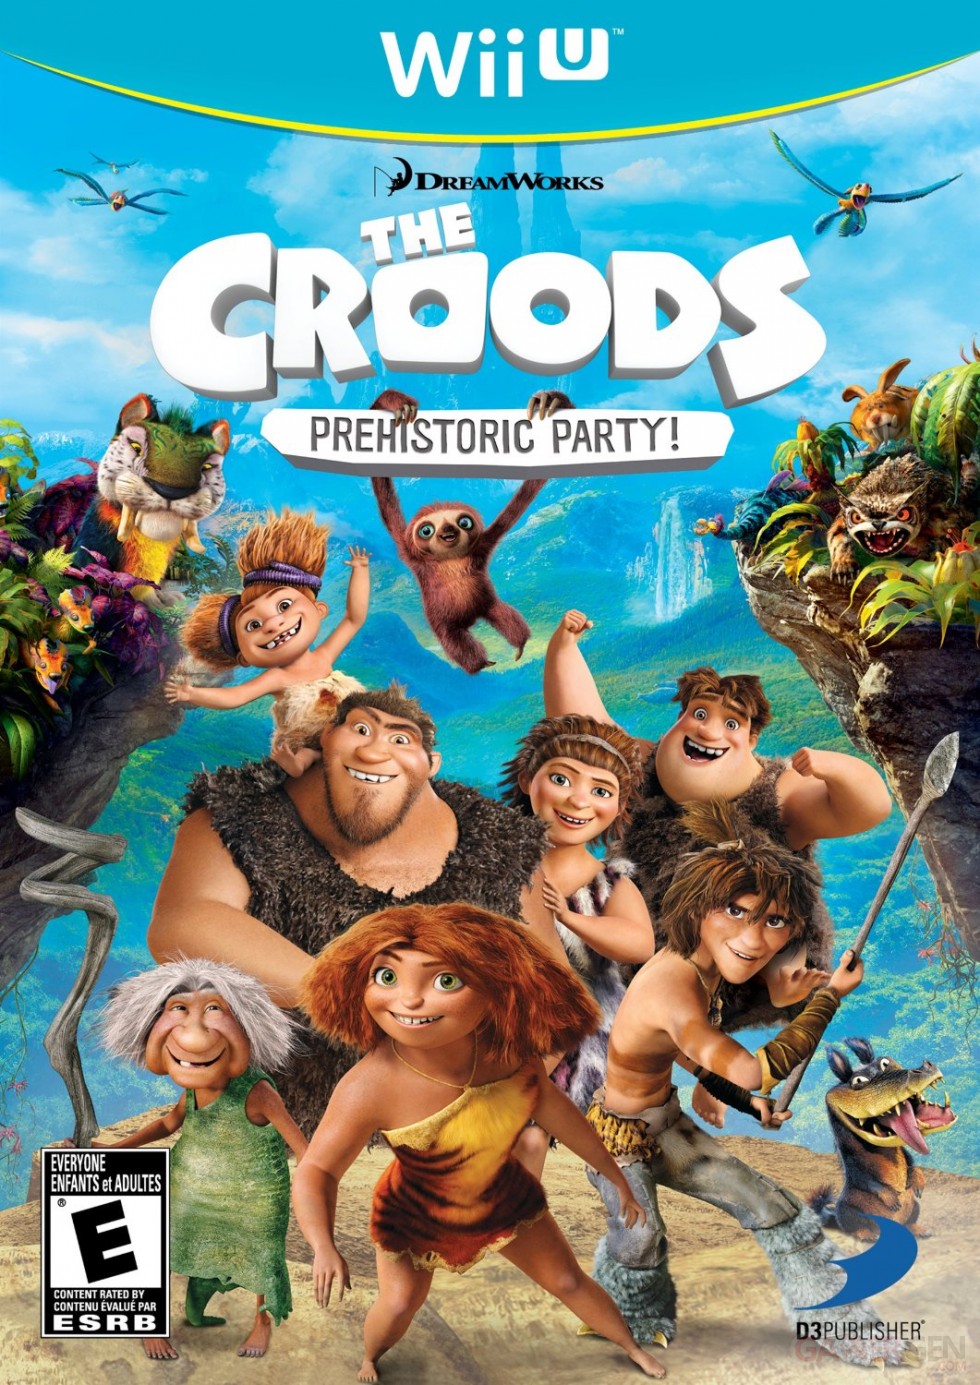 The Croods: Prehistoric Party! 918ROF8Y25L._SL1500_